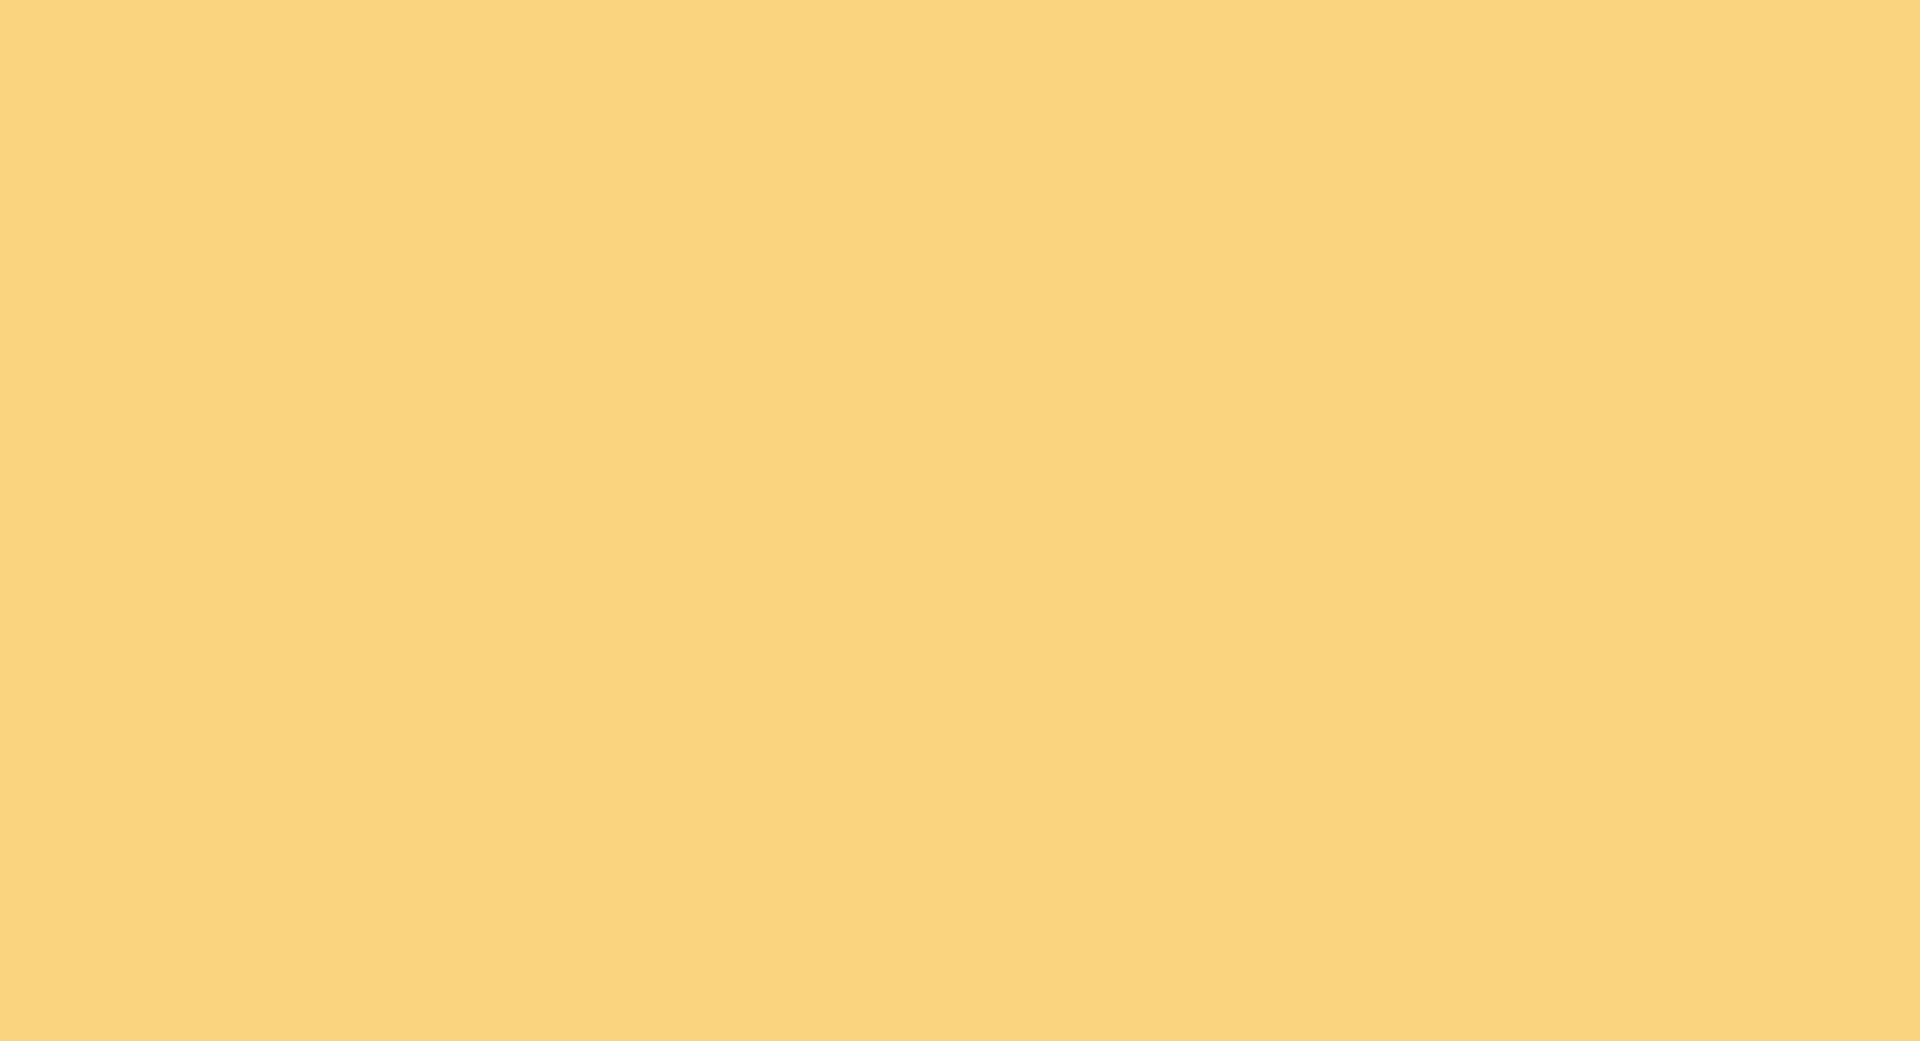 High Quality Butter Yellow Background Blank Meme Template